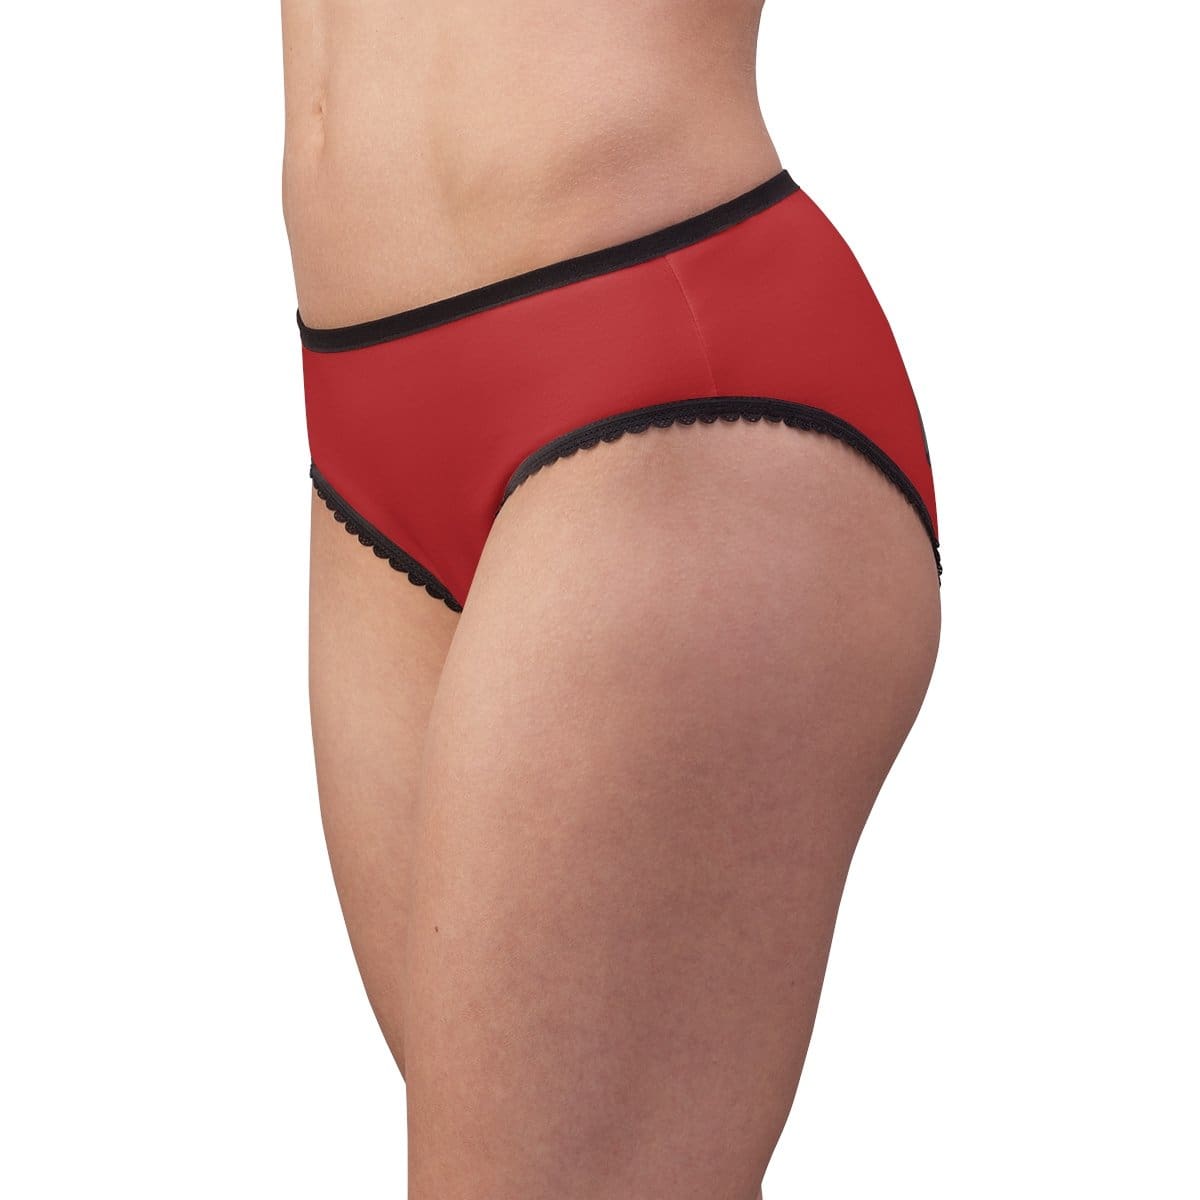 D20 All Natural - Grey on Red Womens Briefs - All Over Prints